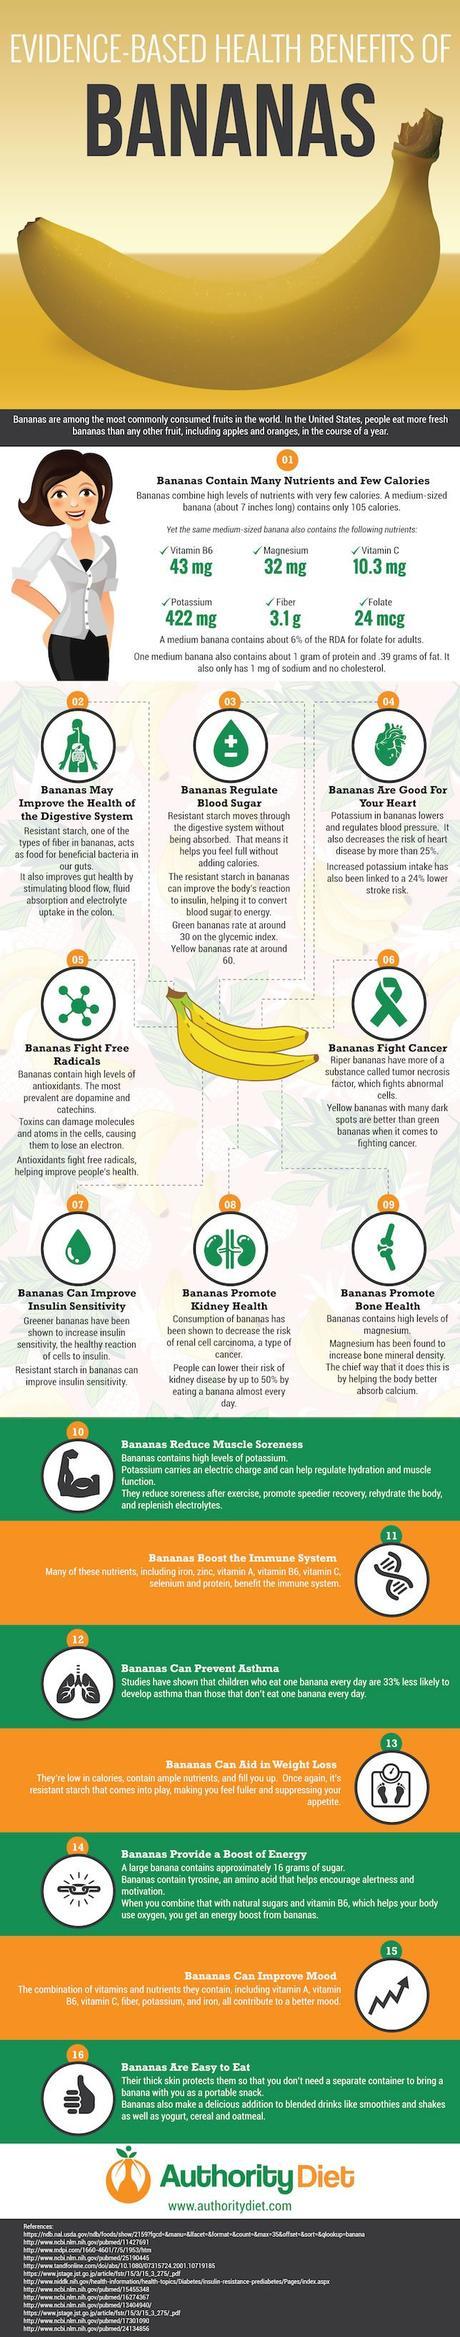 16 Health Benefits of Bananas: Nutrition Science-Based Facts